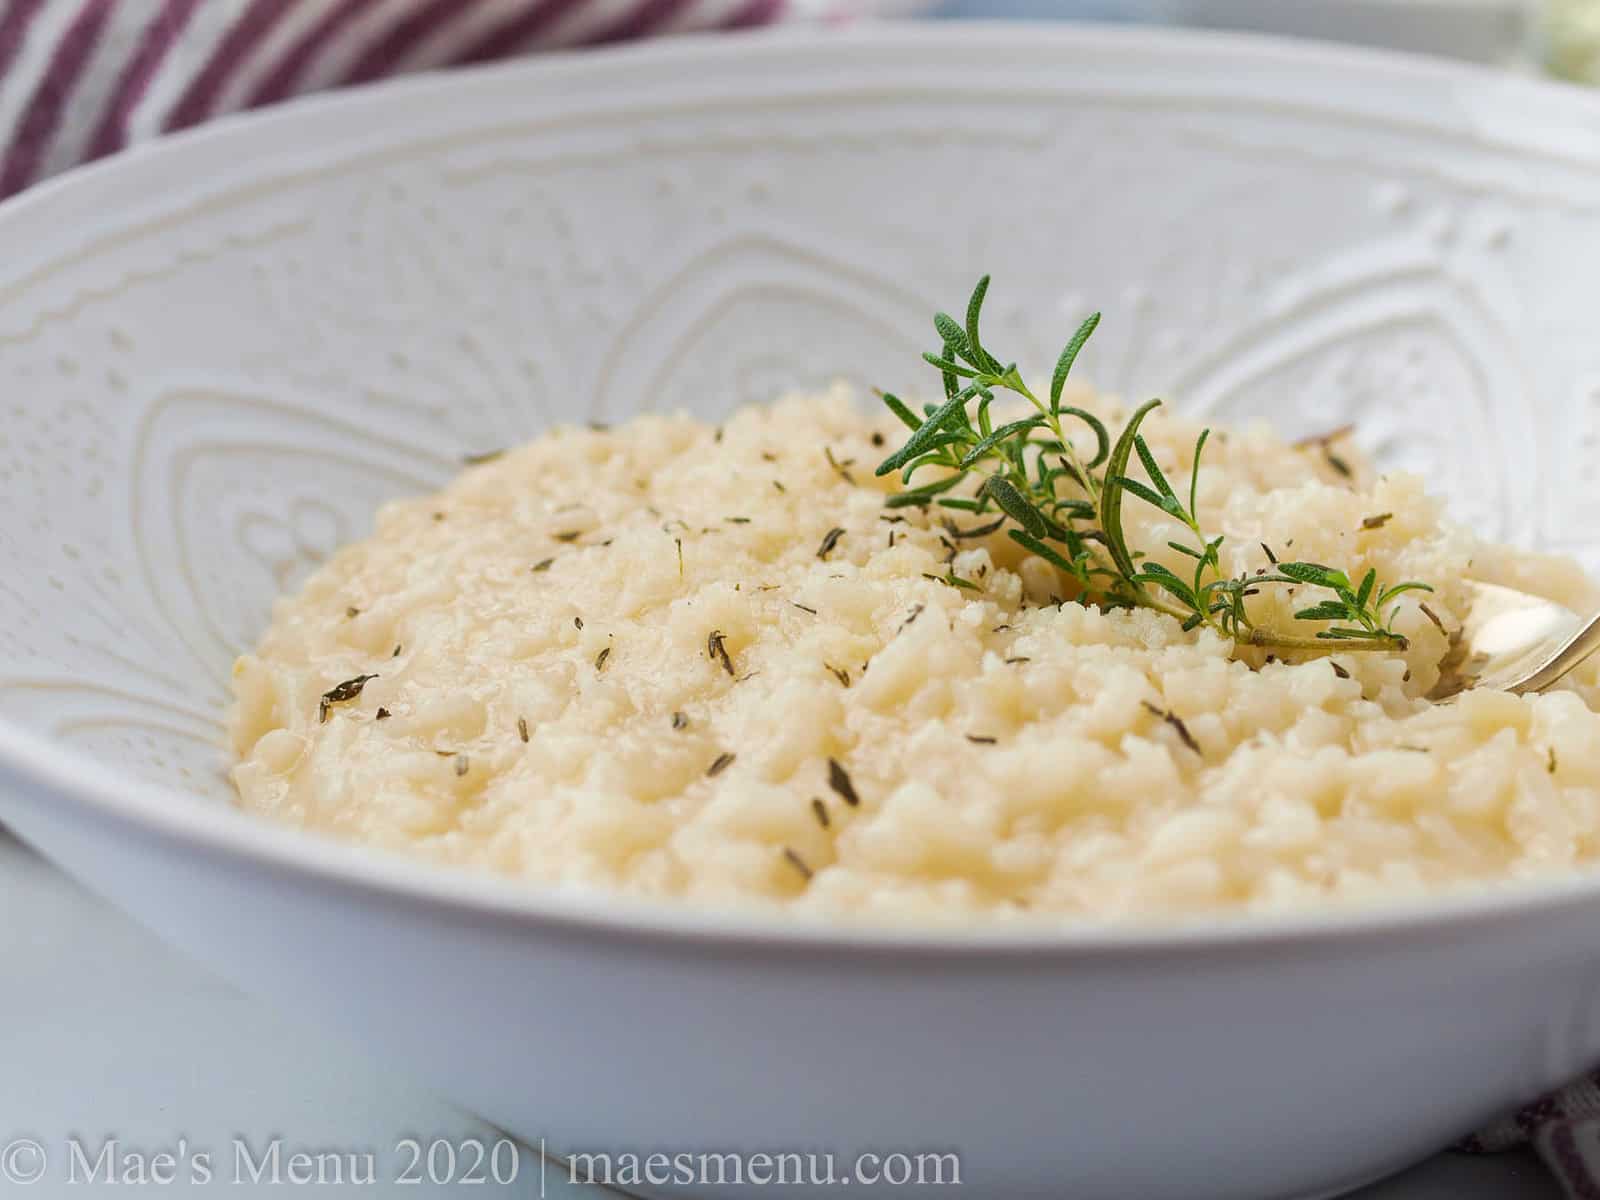 Up close shot of a white bowl of risotto.